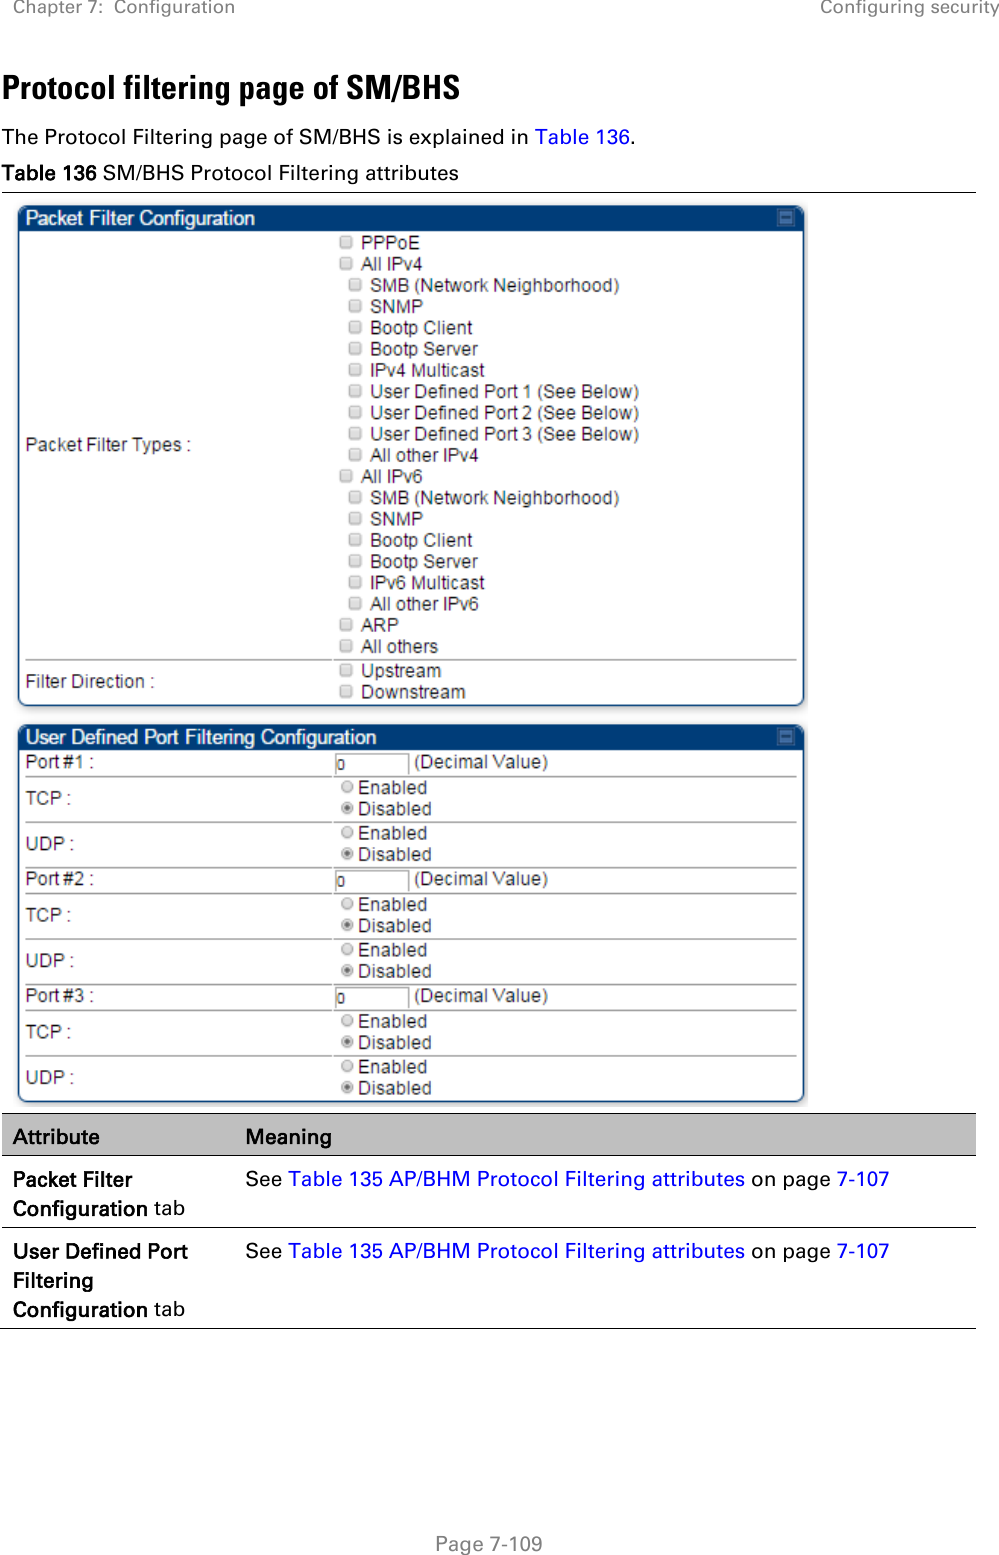 Chapter 7:  Configuration Configuring security   Page 7-109 Protocol filtering page of SM/BHS The Protocol Filtering page of SM/BHS is explained in Table 136. Table 136 SM/BHS Protocol Filtering attributes  Attribute Meaning Packet Filter Configuration tab See Table 135 AP/BHM Protocol Filtering attributes on page 7-107 User Defined Port Filtering Configuration tab See Table 135 AP/BHM Protocol Filtering attributes on page 7-107  